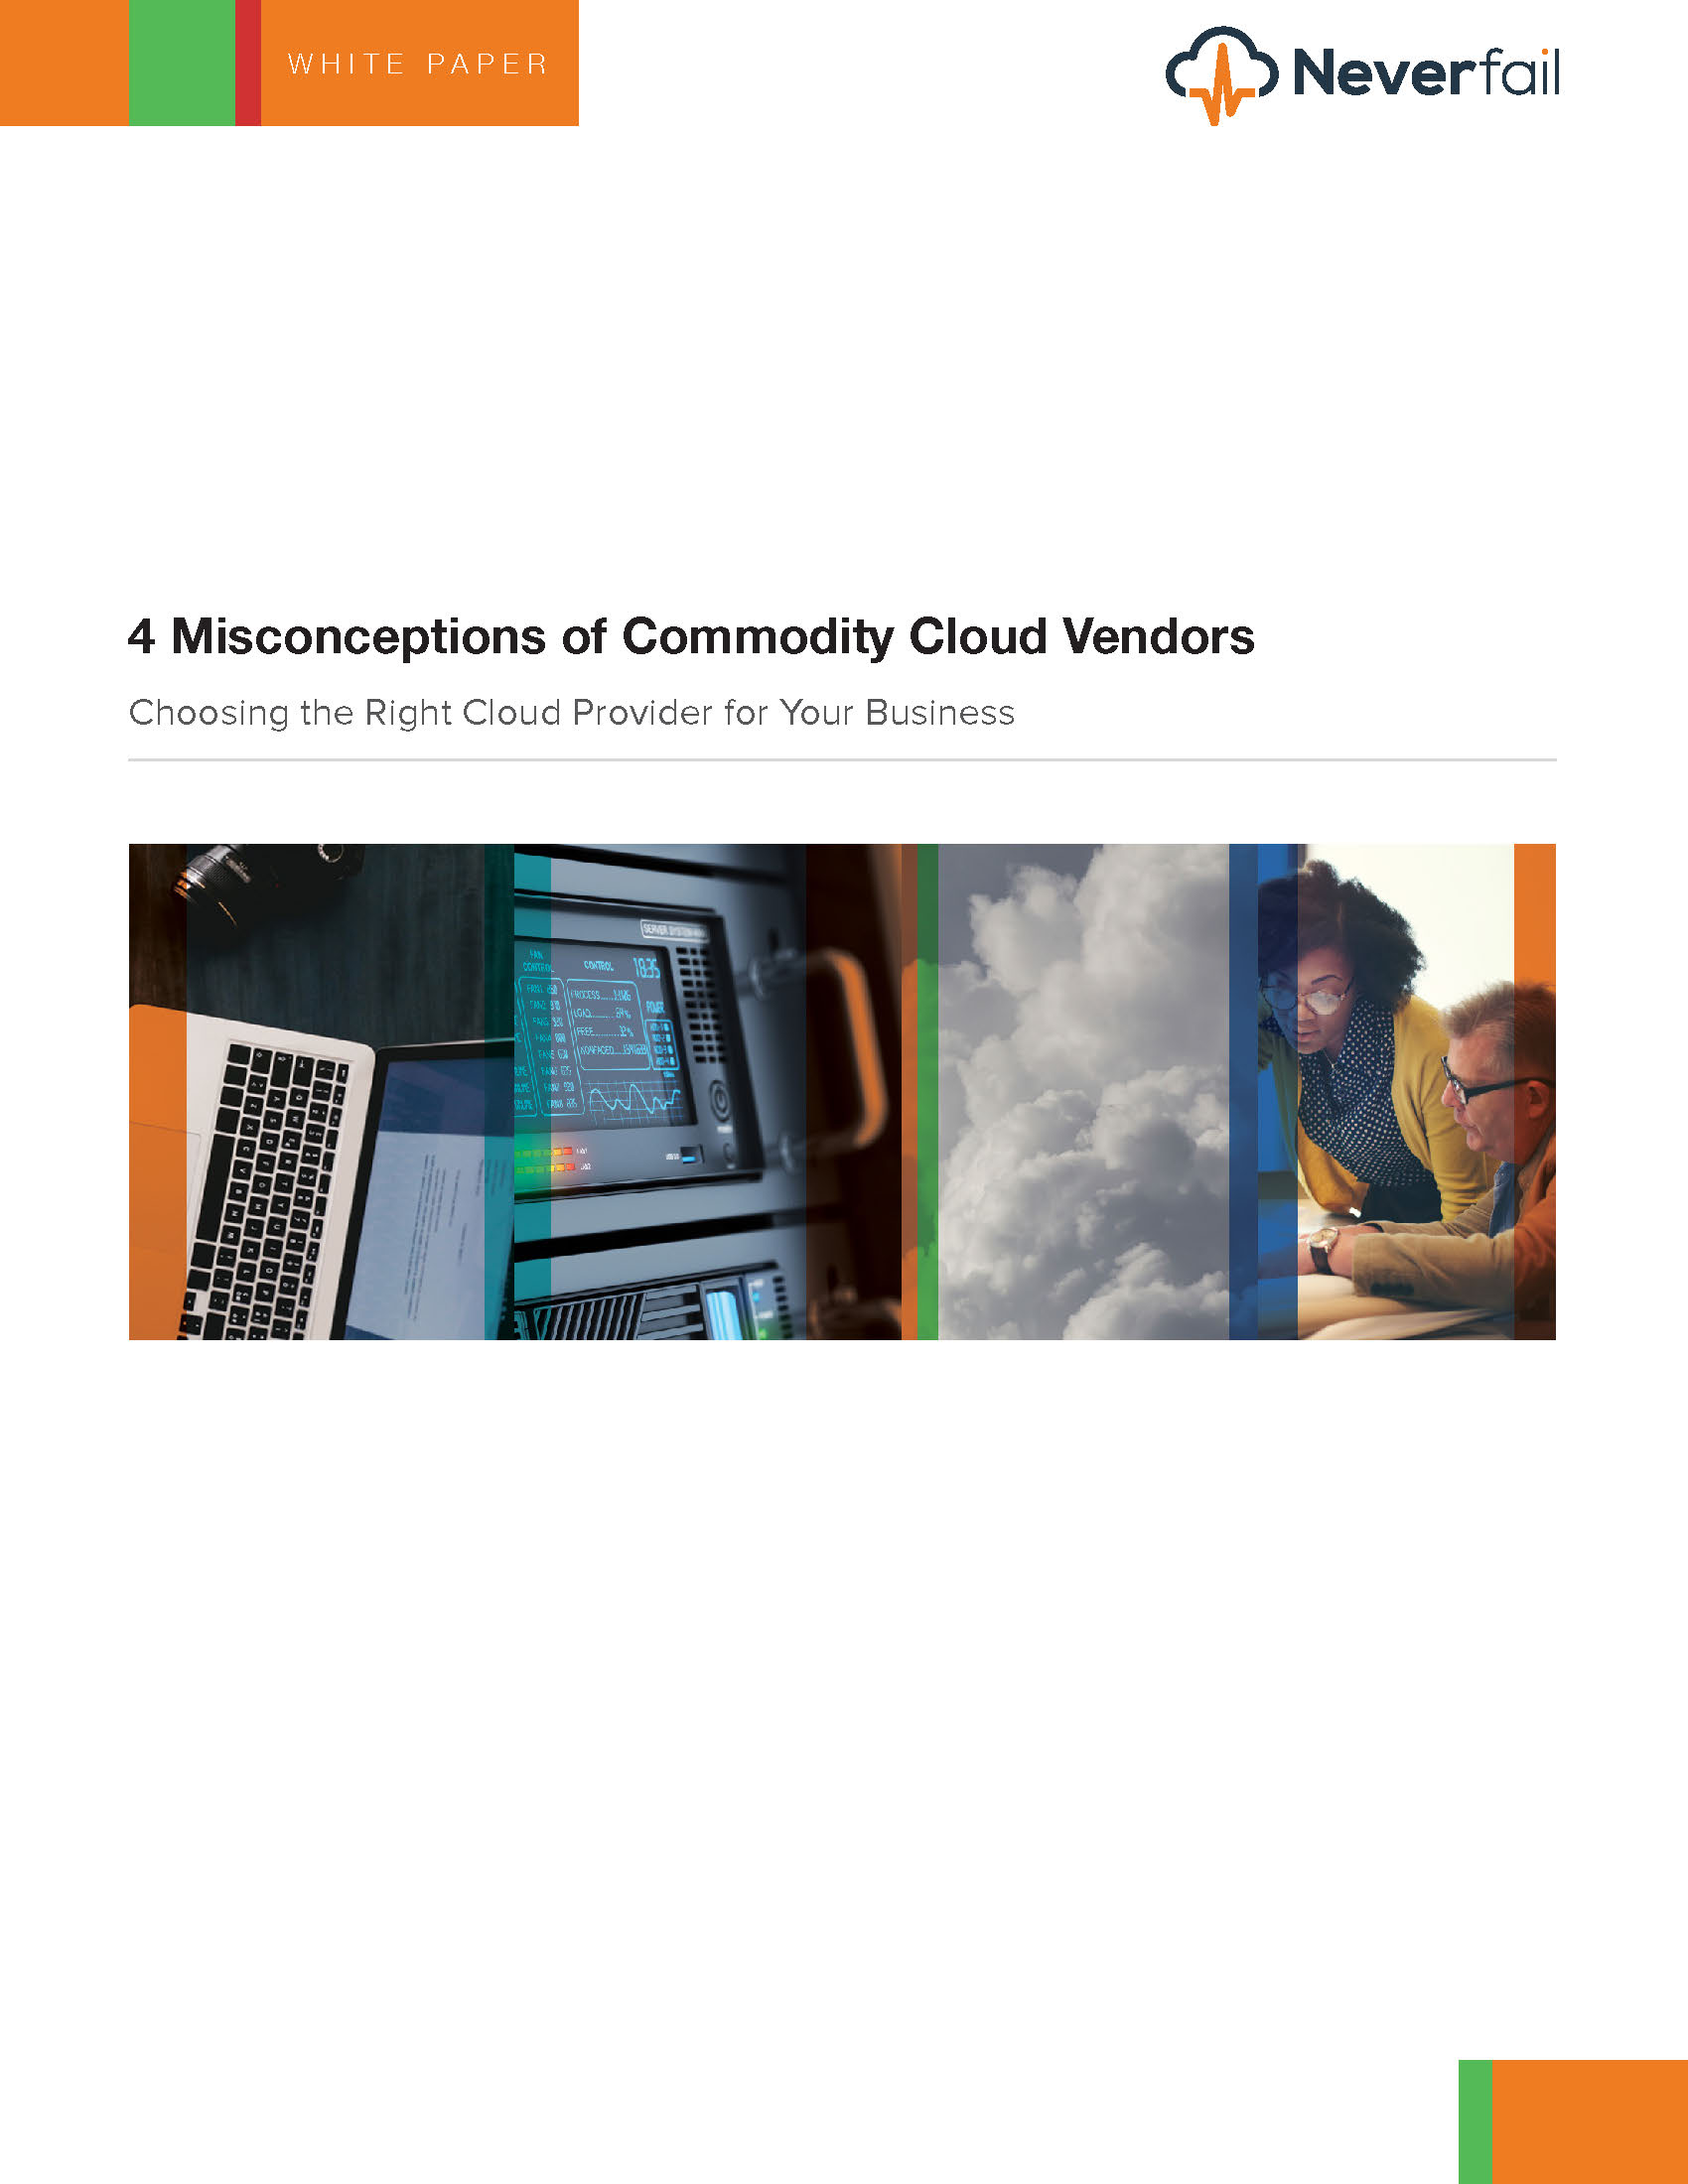 White Paper on Commodity Cloud Vendors